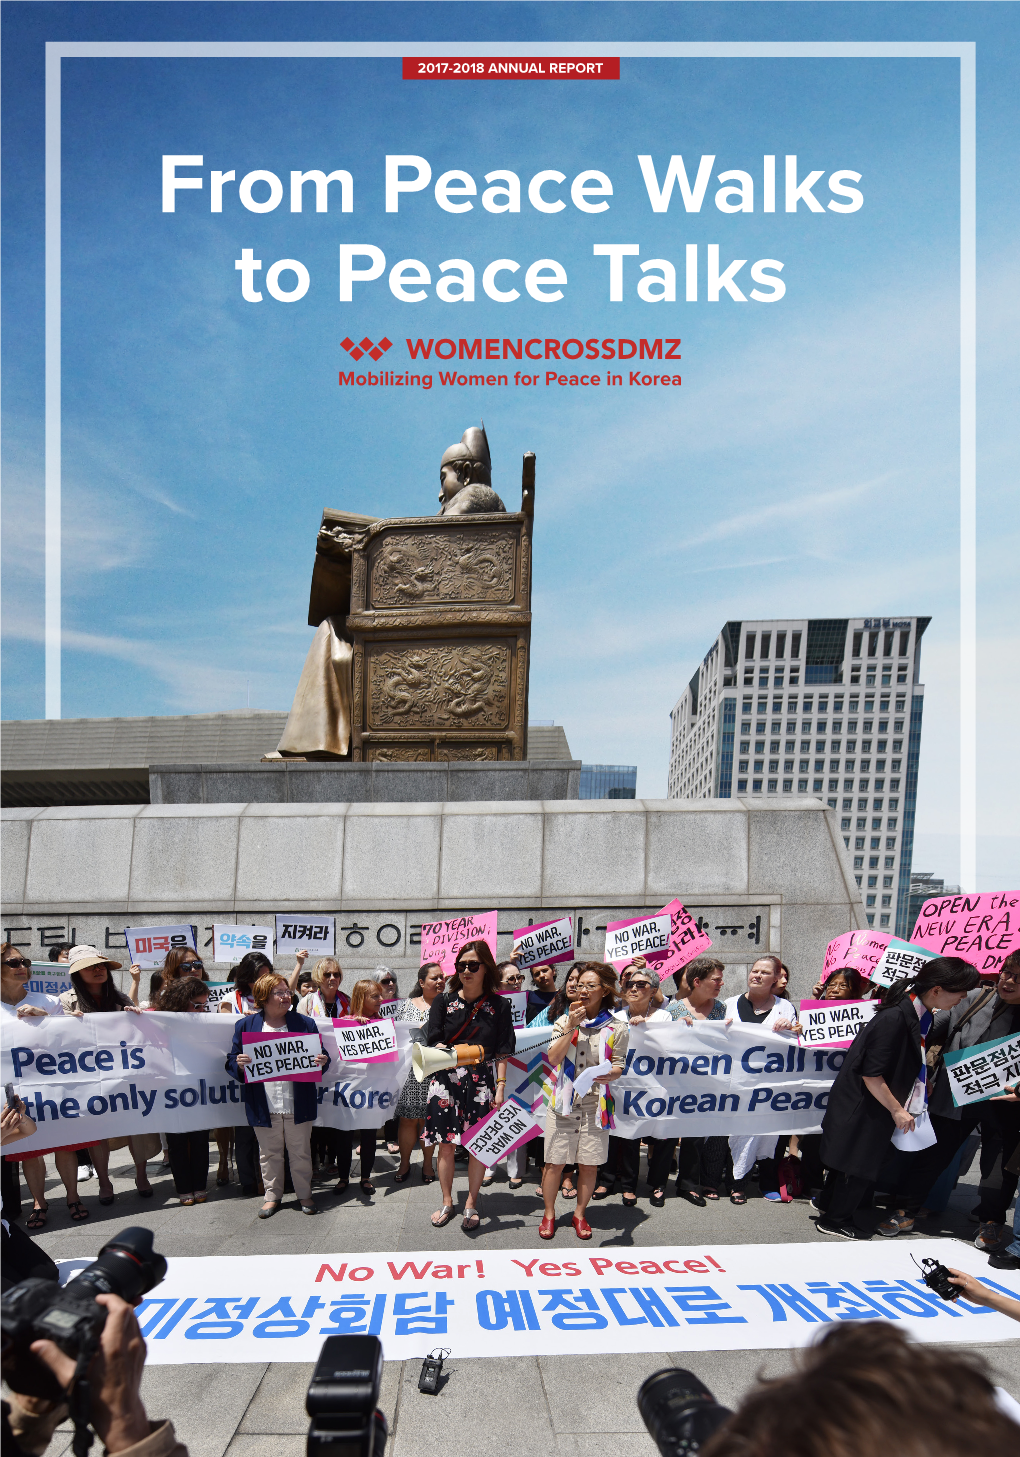 2017-2018 ANNUAL REPORT from Peace Walks to Peace Talks